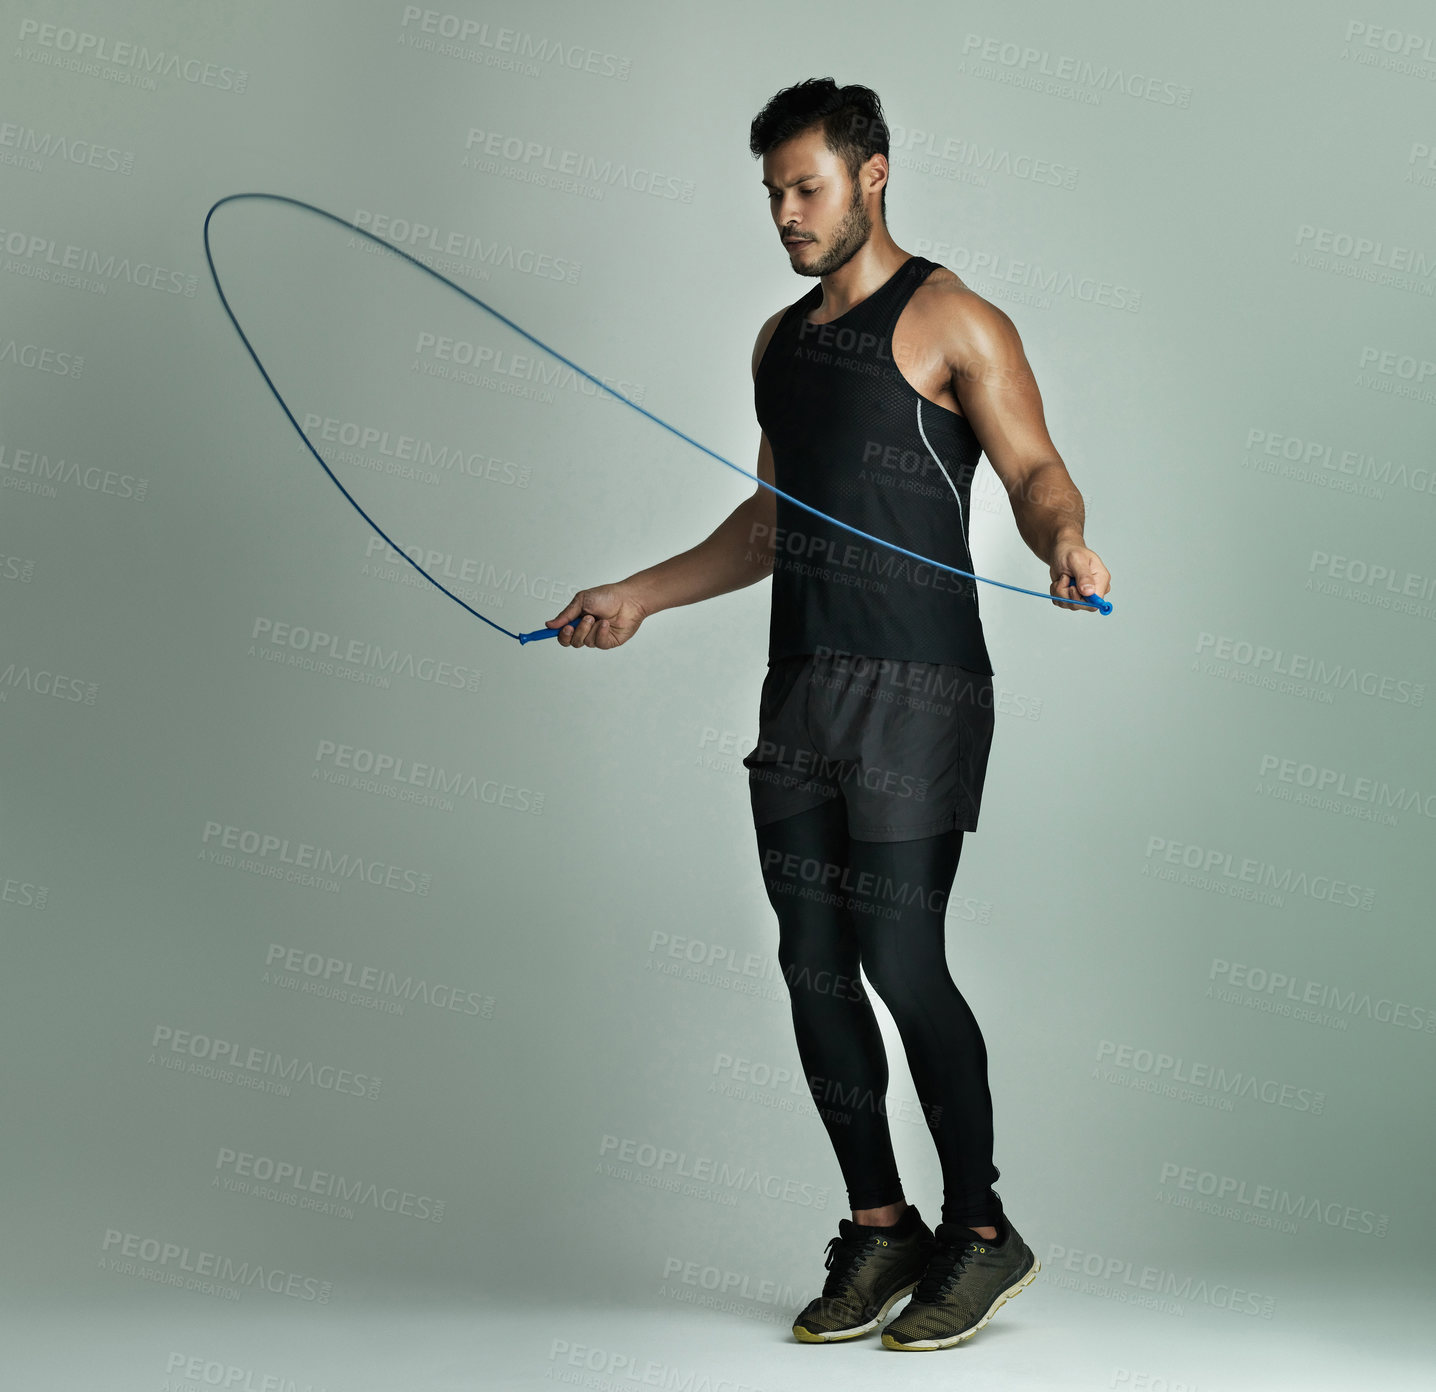 Buy stock photo Studio shot of a young man skipping with a jump rope against a gray background